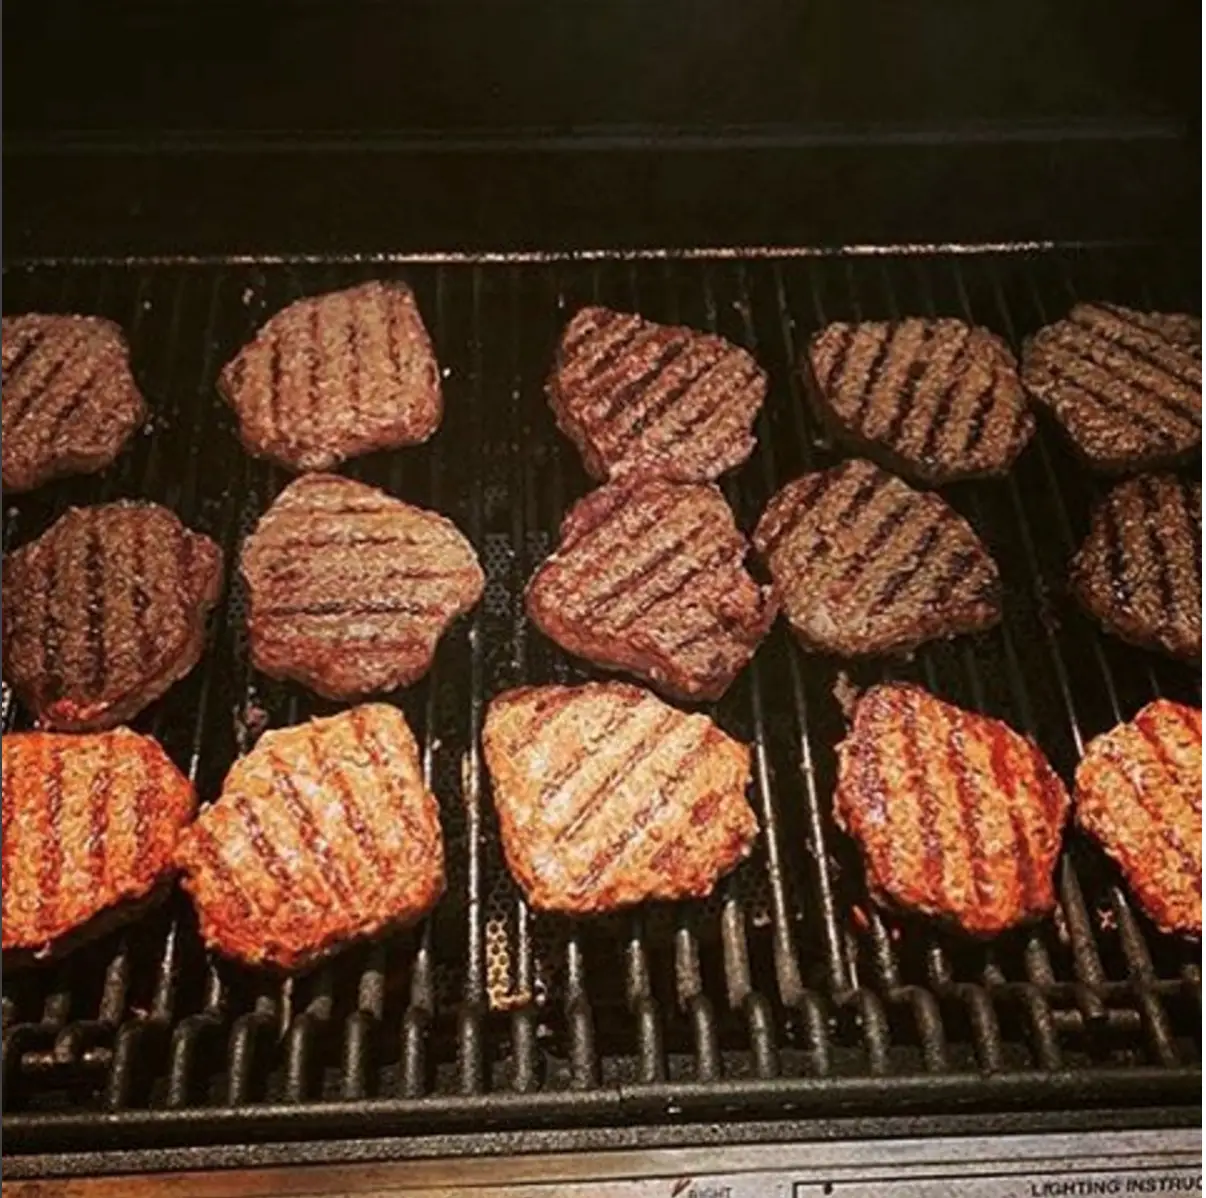 @bw2151 is cooking up some BUBBA